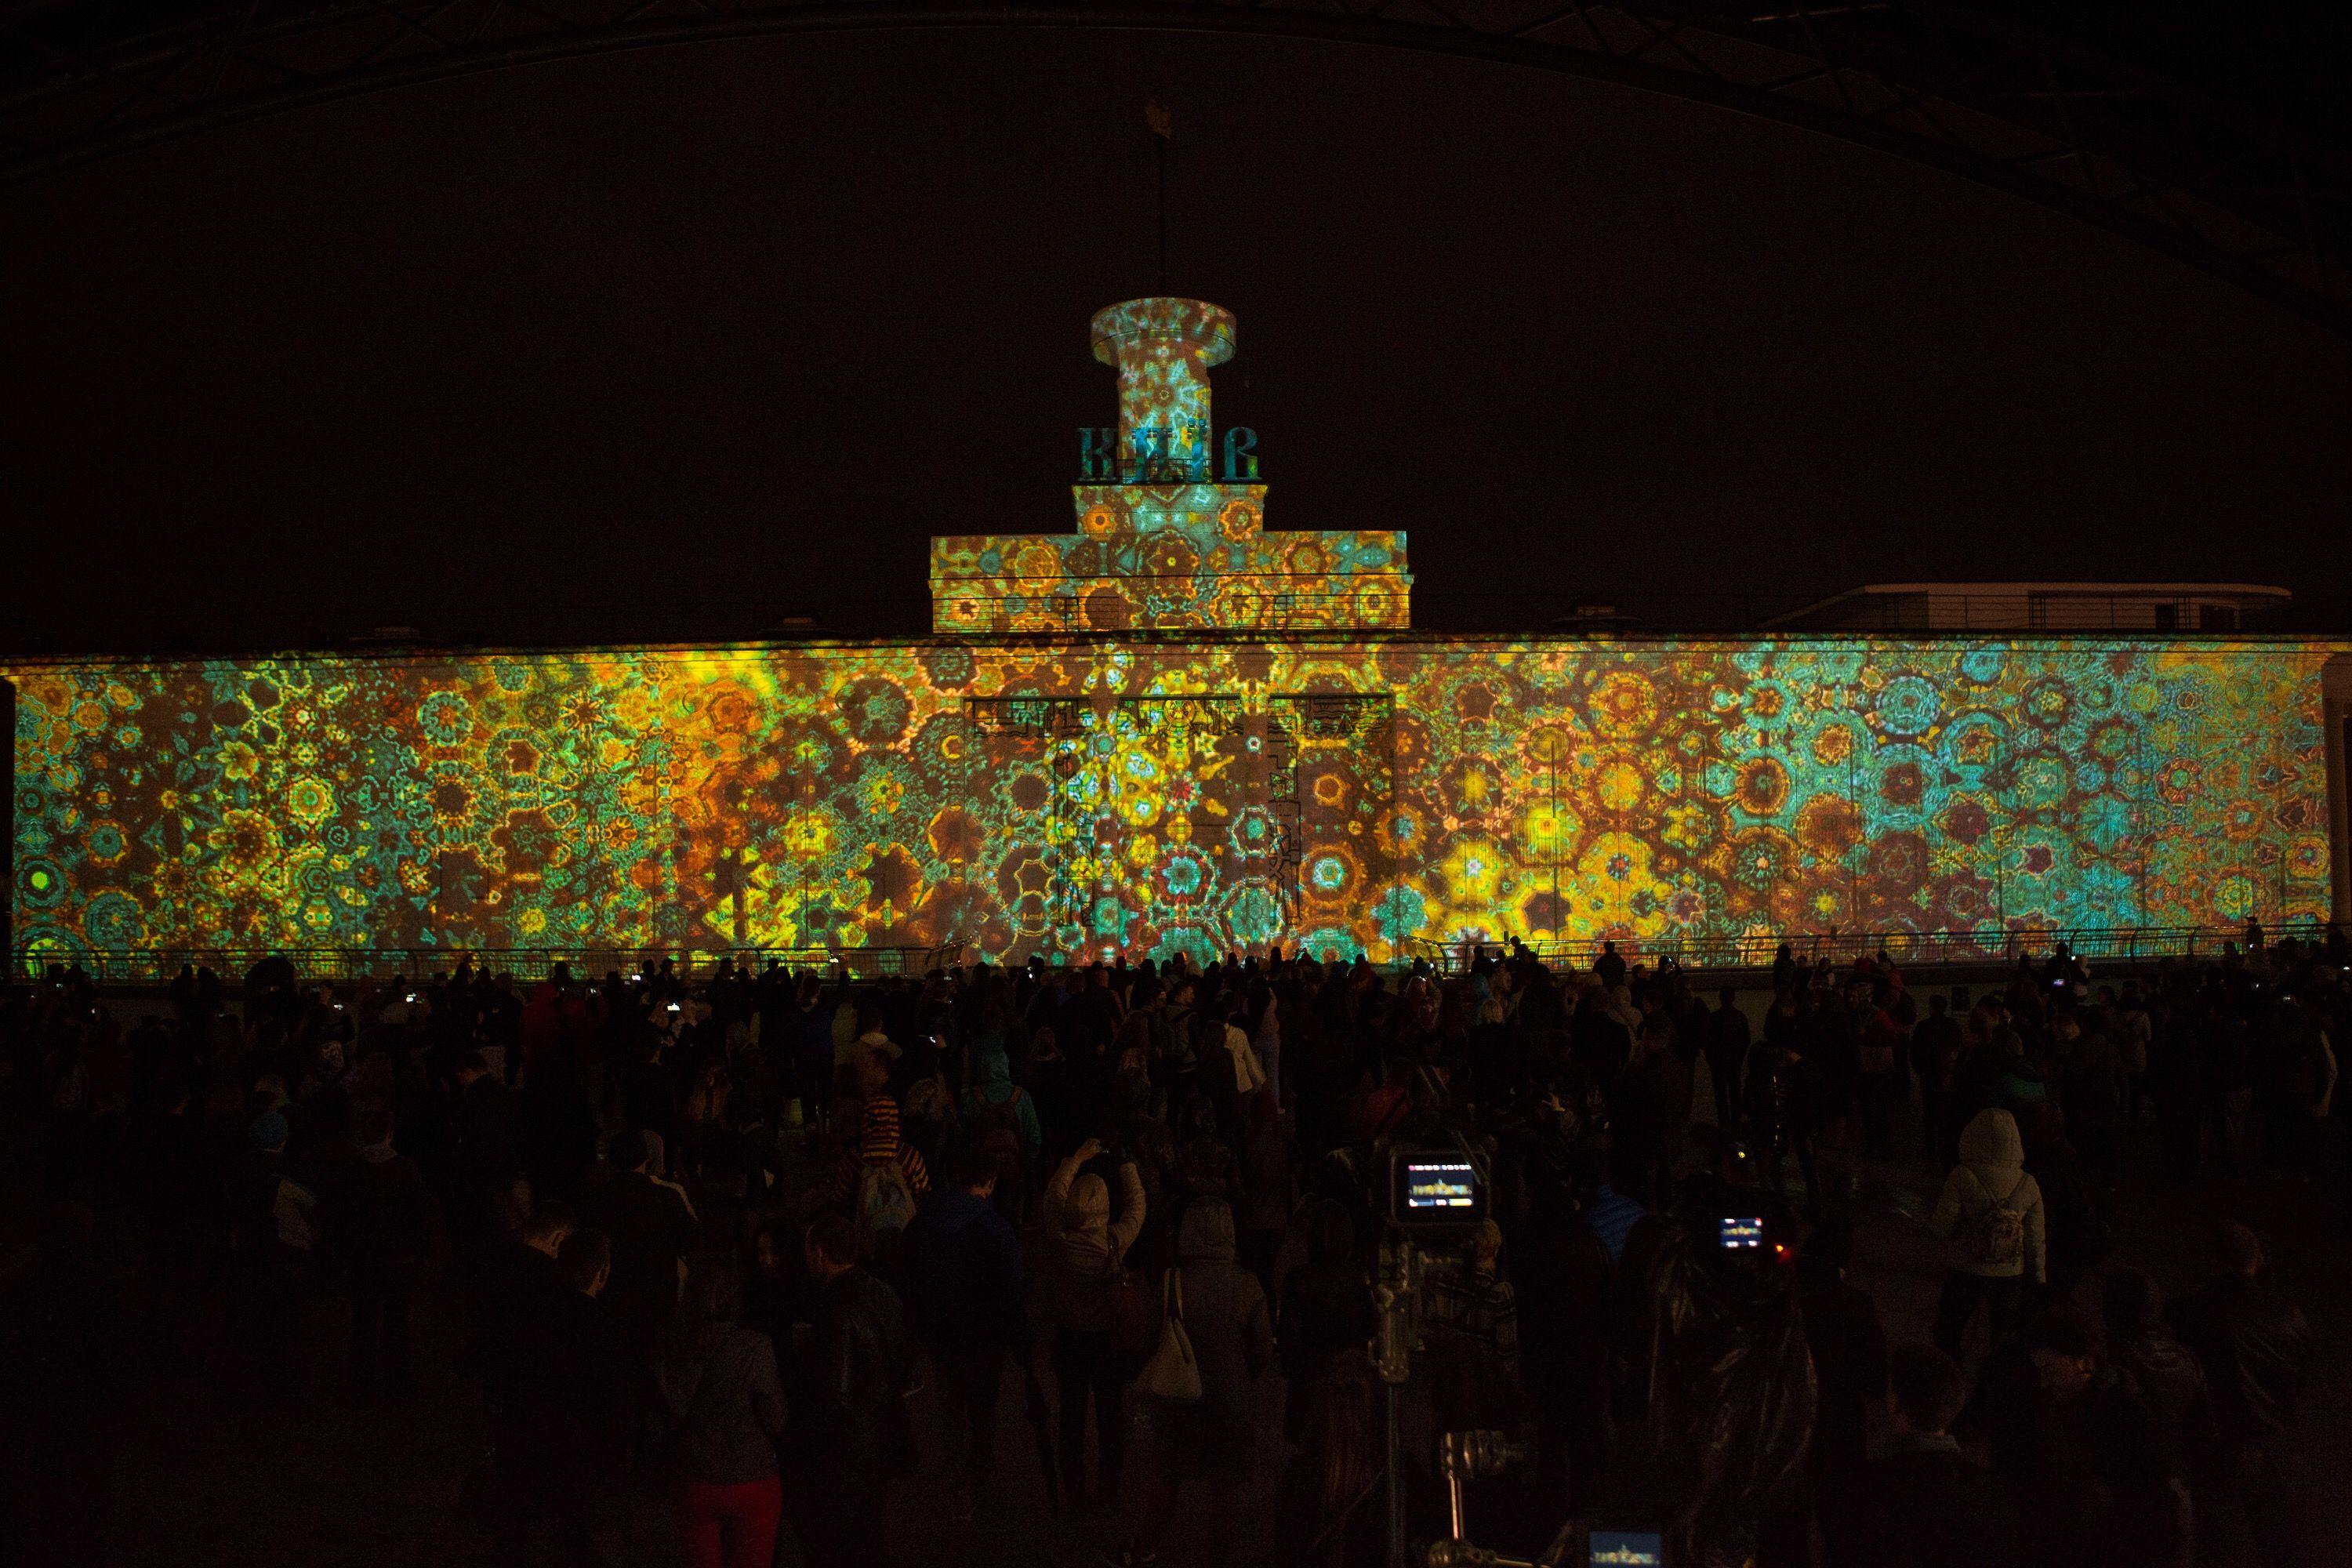 Projection onto the Kyiv River Port building